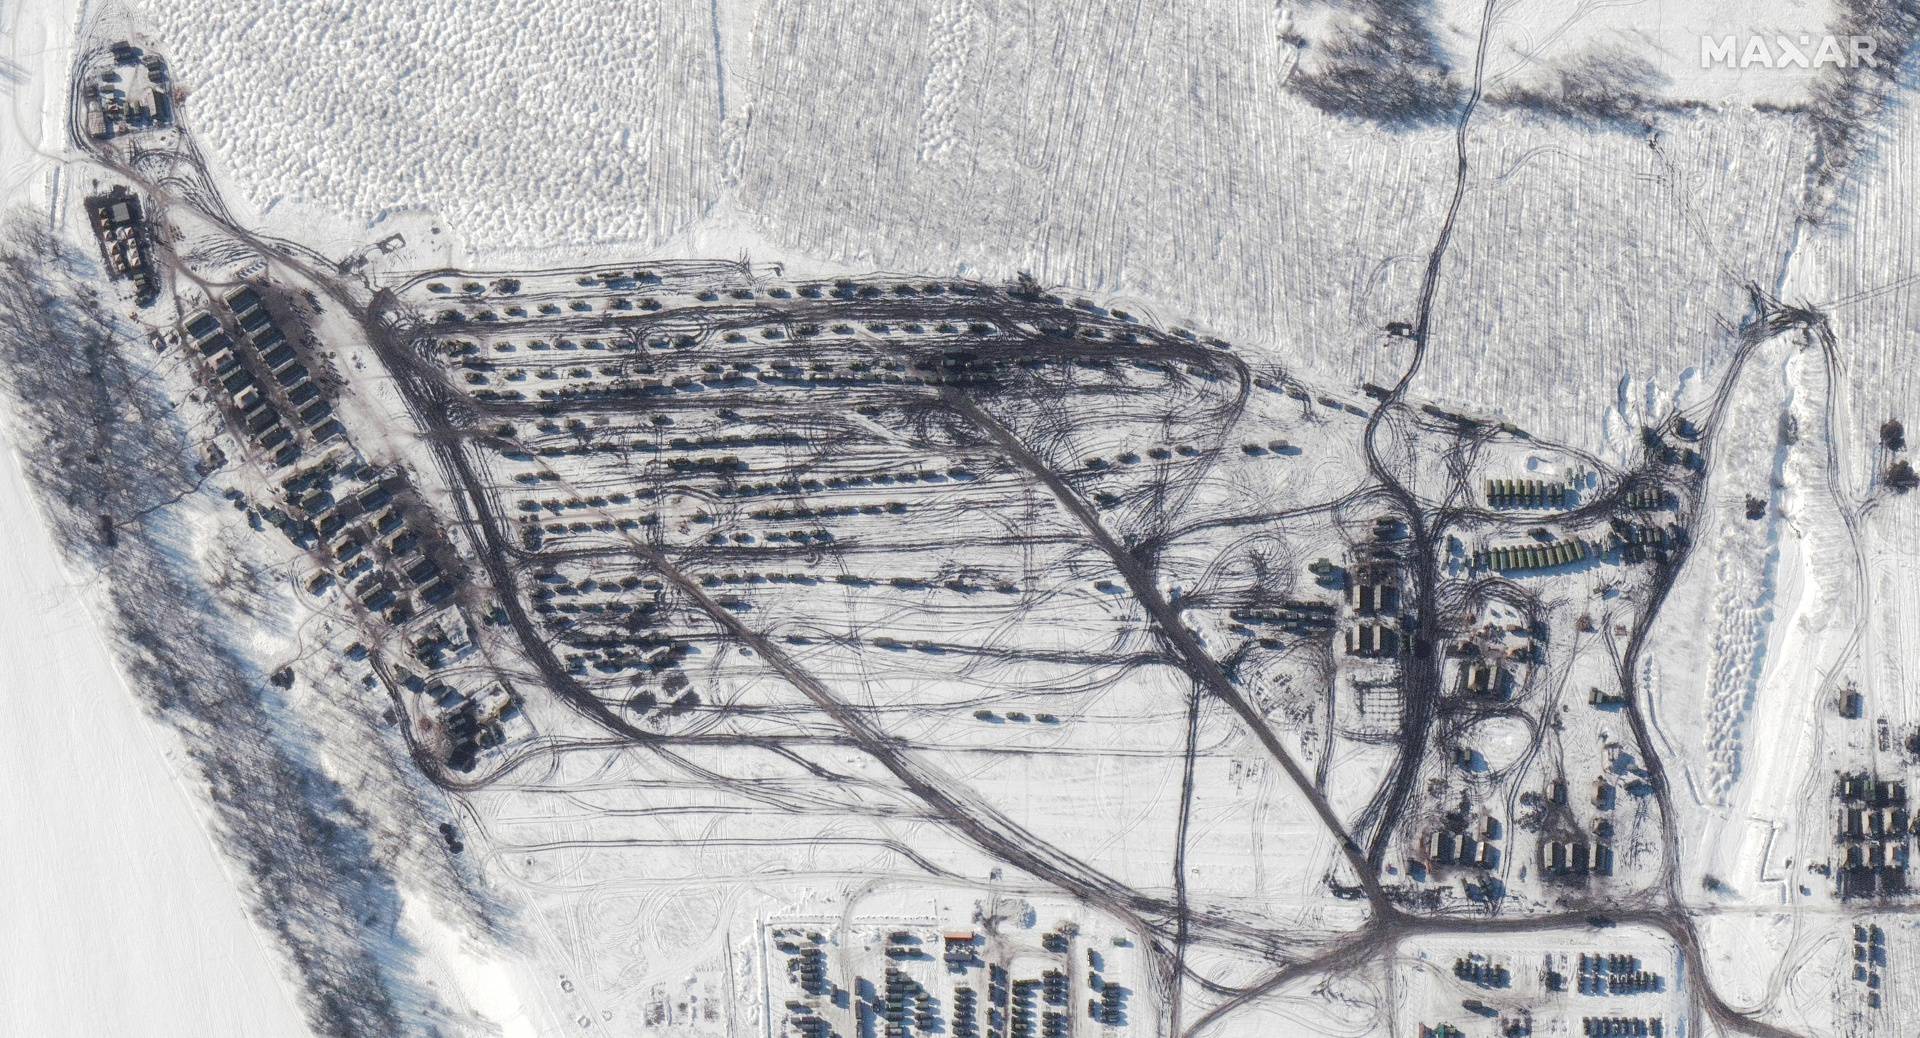 A satellite image shows a closer view of a battle group in formation in Soloti